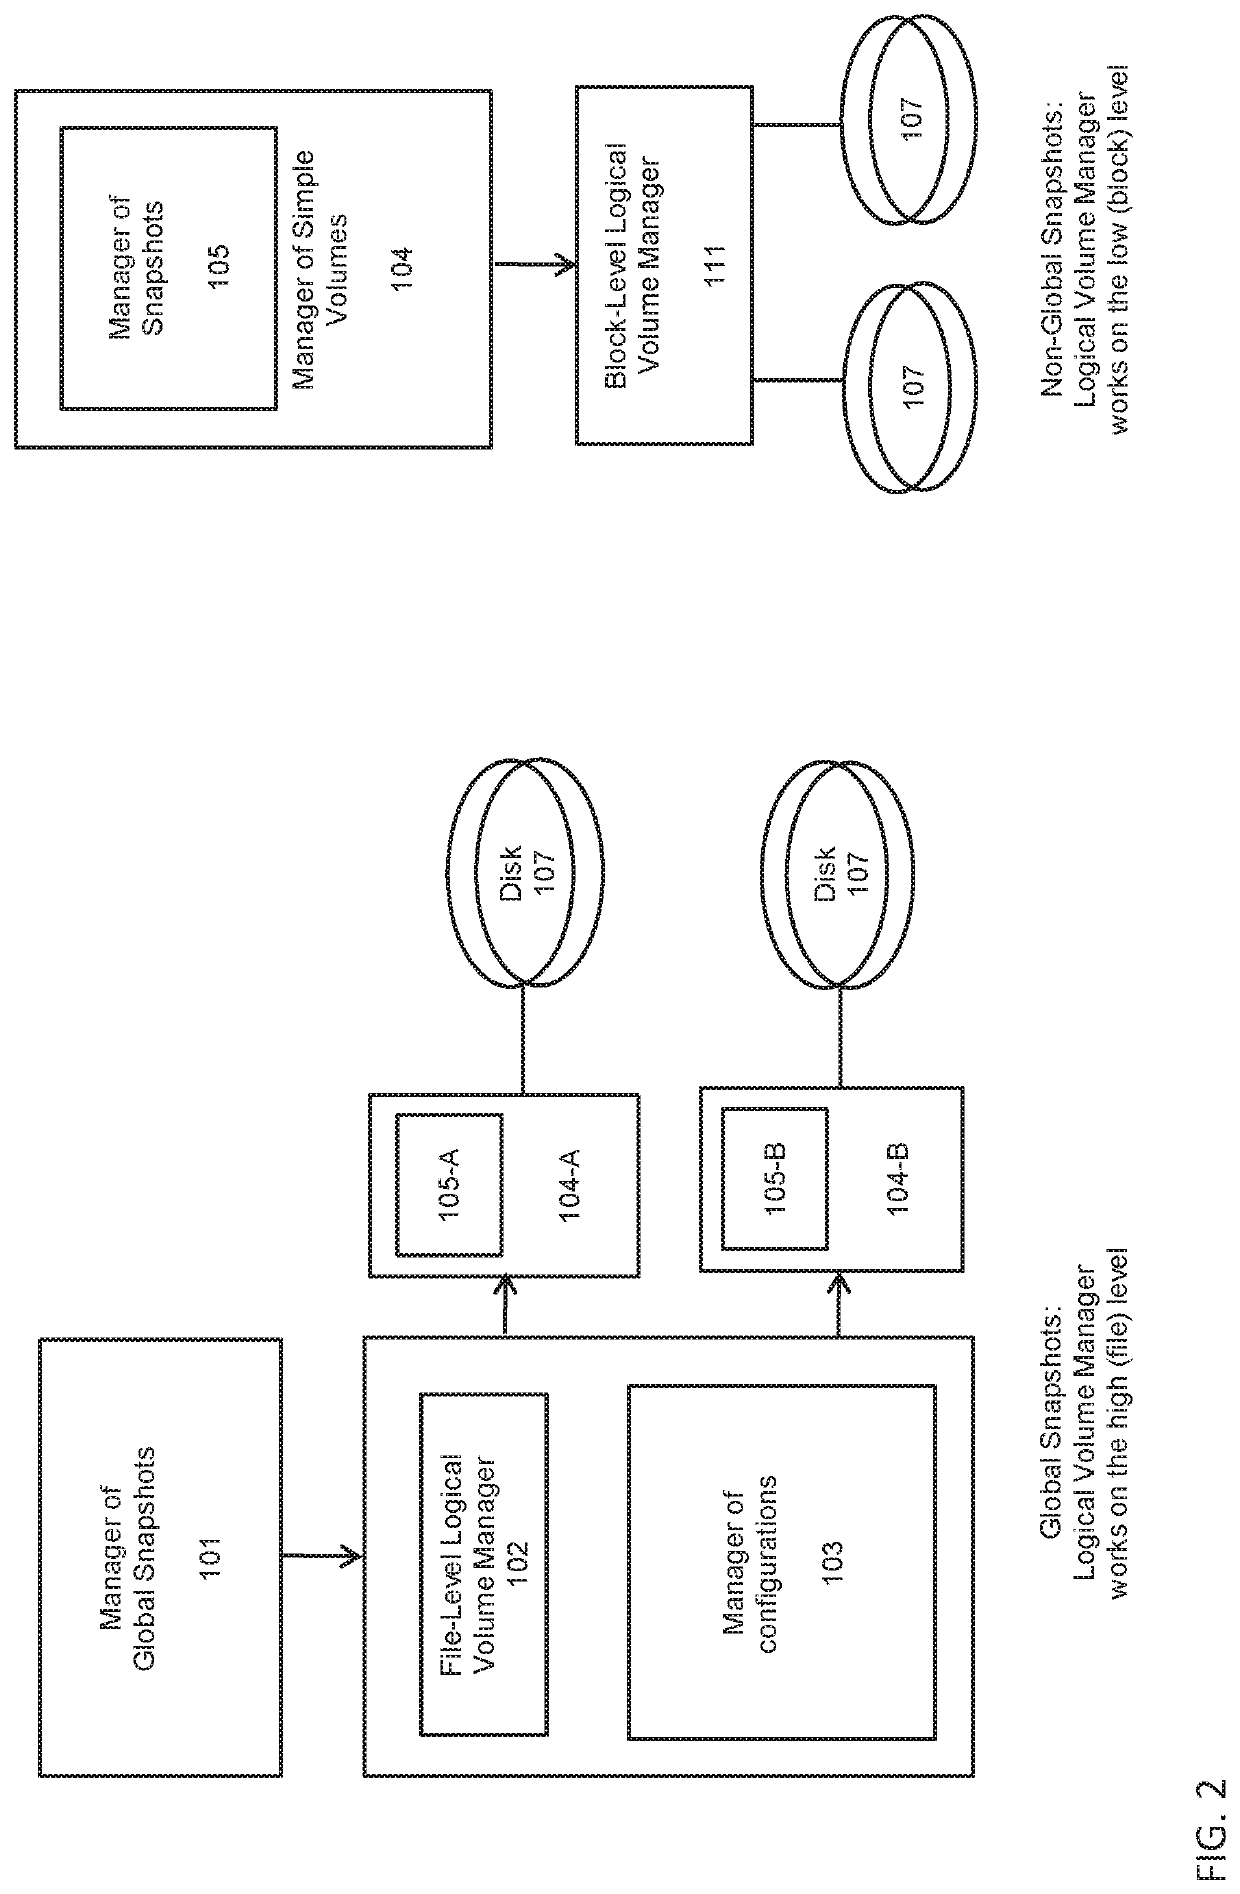 Method and system for global snapshots of distributed storage